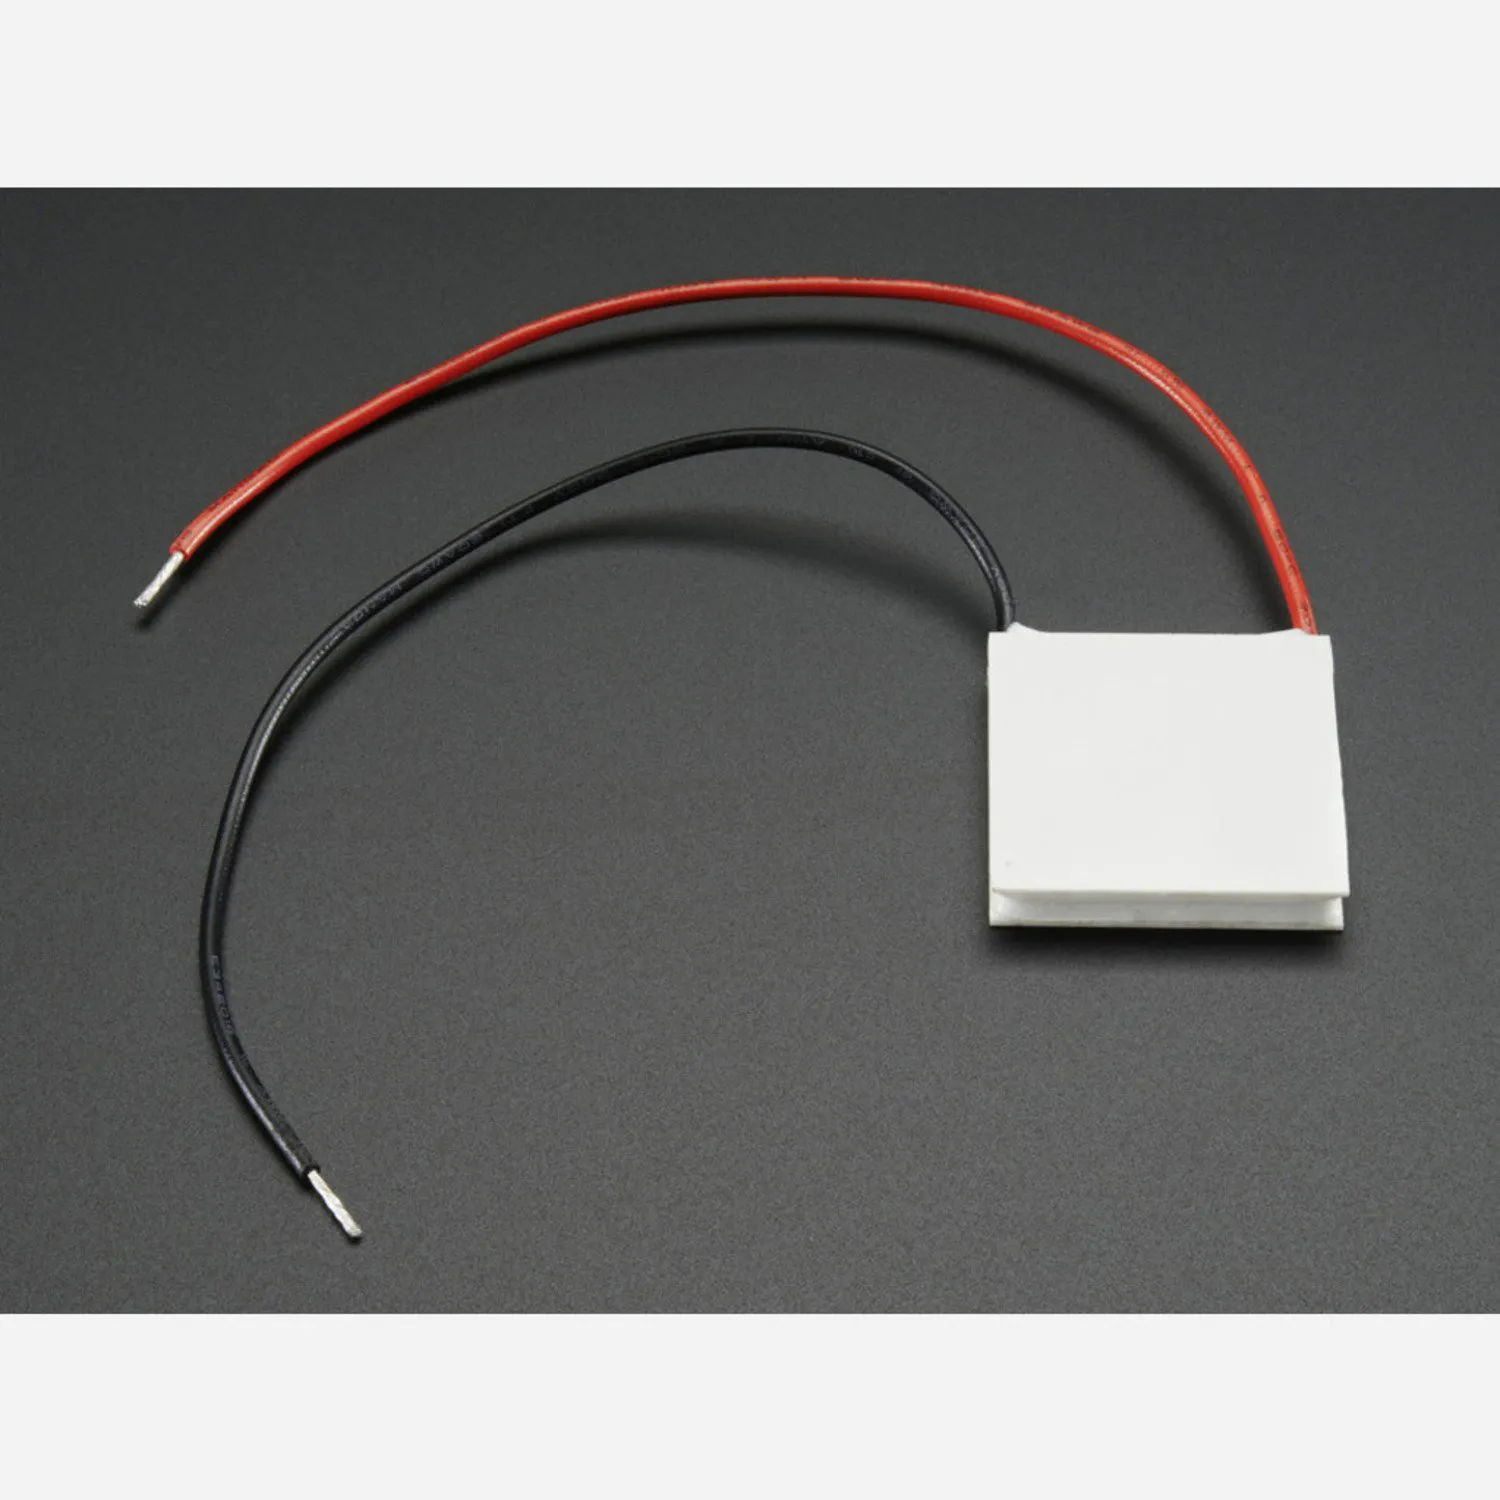 Photo of Peltier Thermo-Electric Cooler Module - 5V 1A